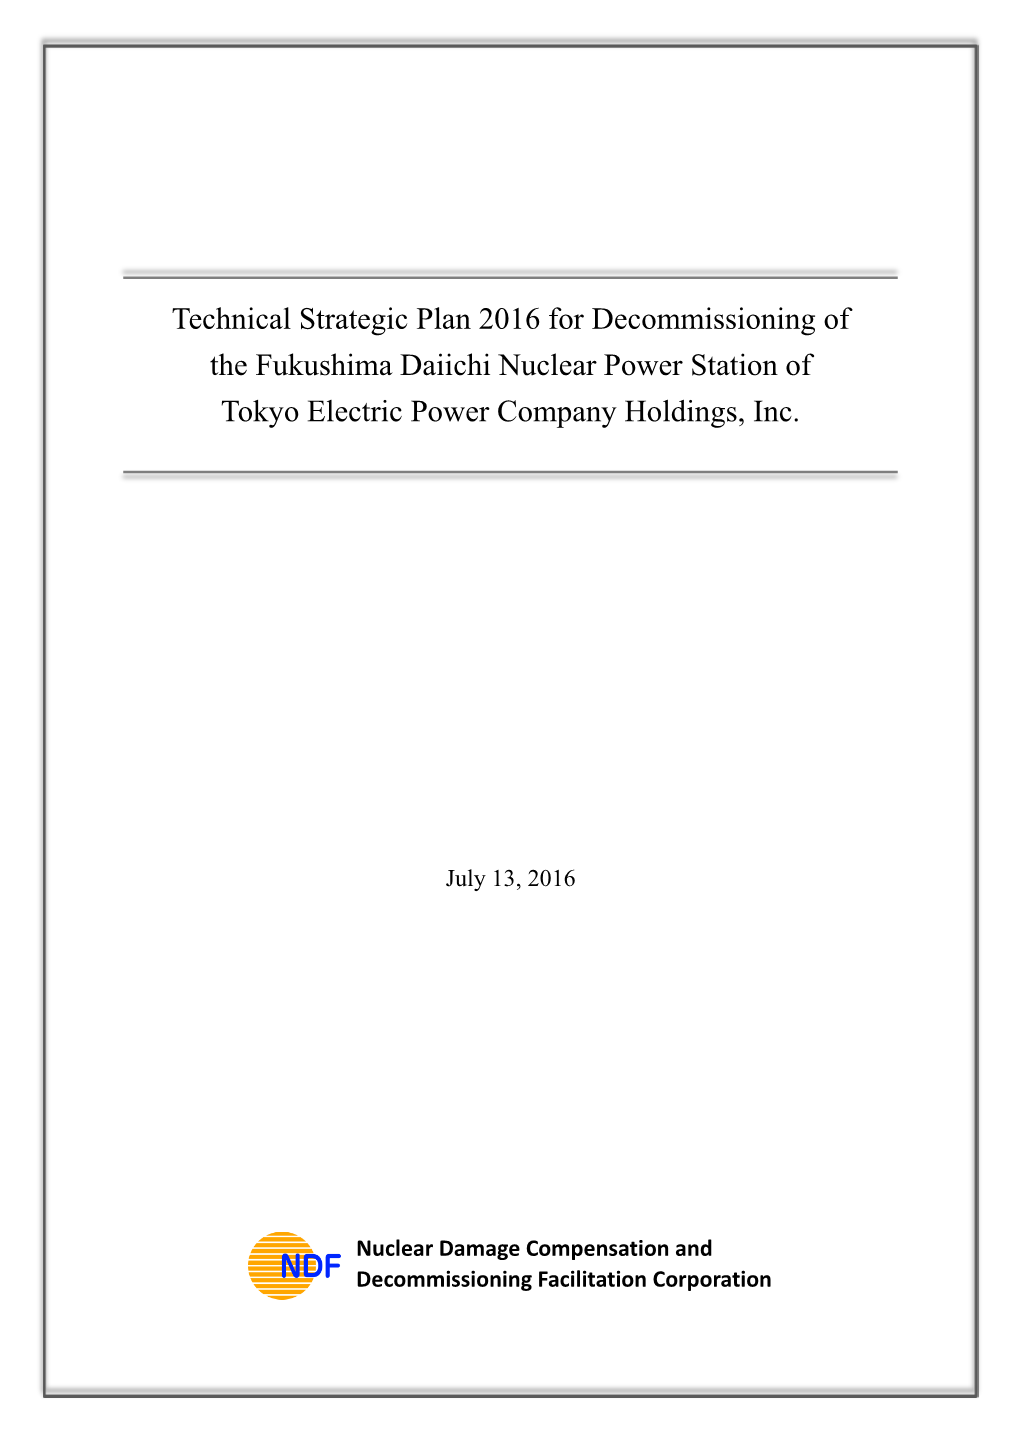 Technical Strategic Plan 2016 for Decommissioning of the Fukushima Daiichi Nuclear Power Station of Tokyo Electric Power Company Holdings, Inc